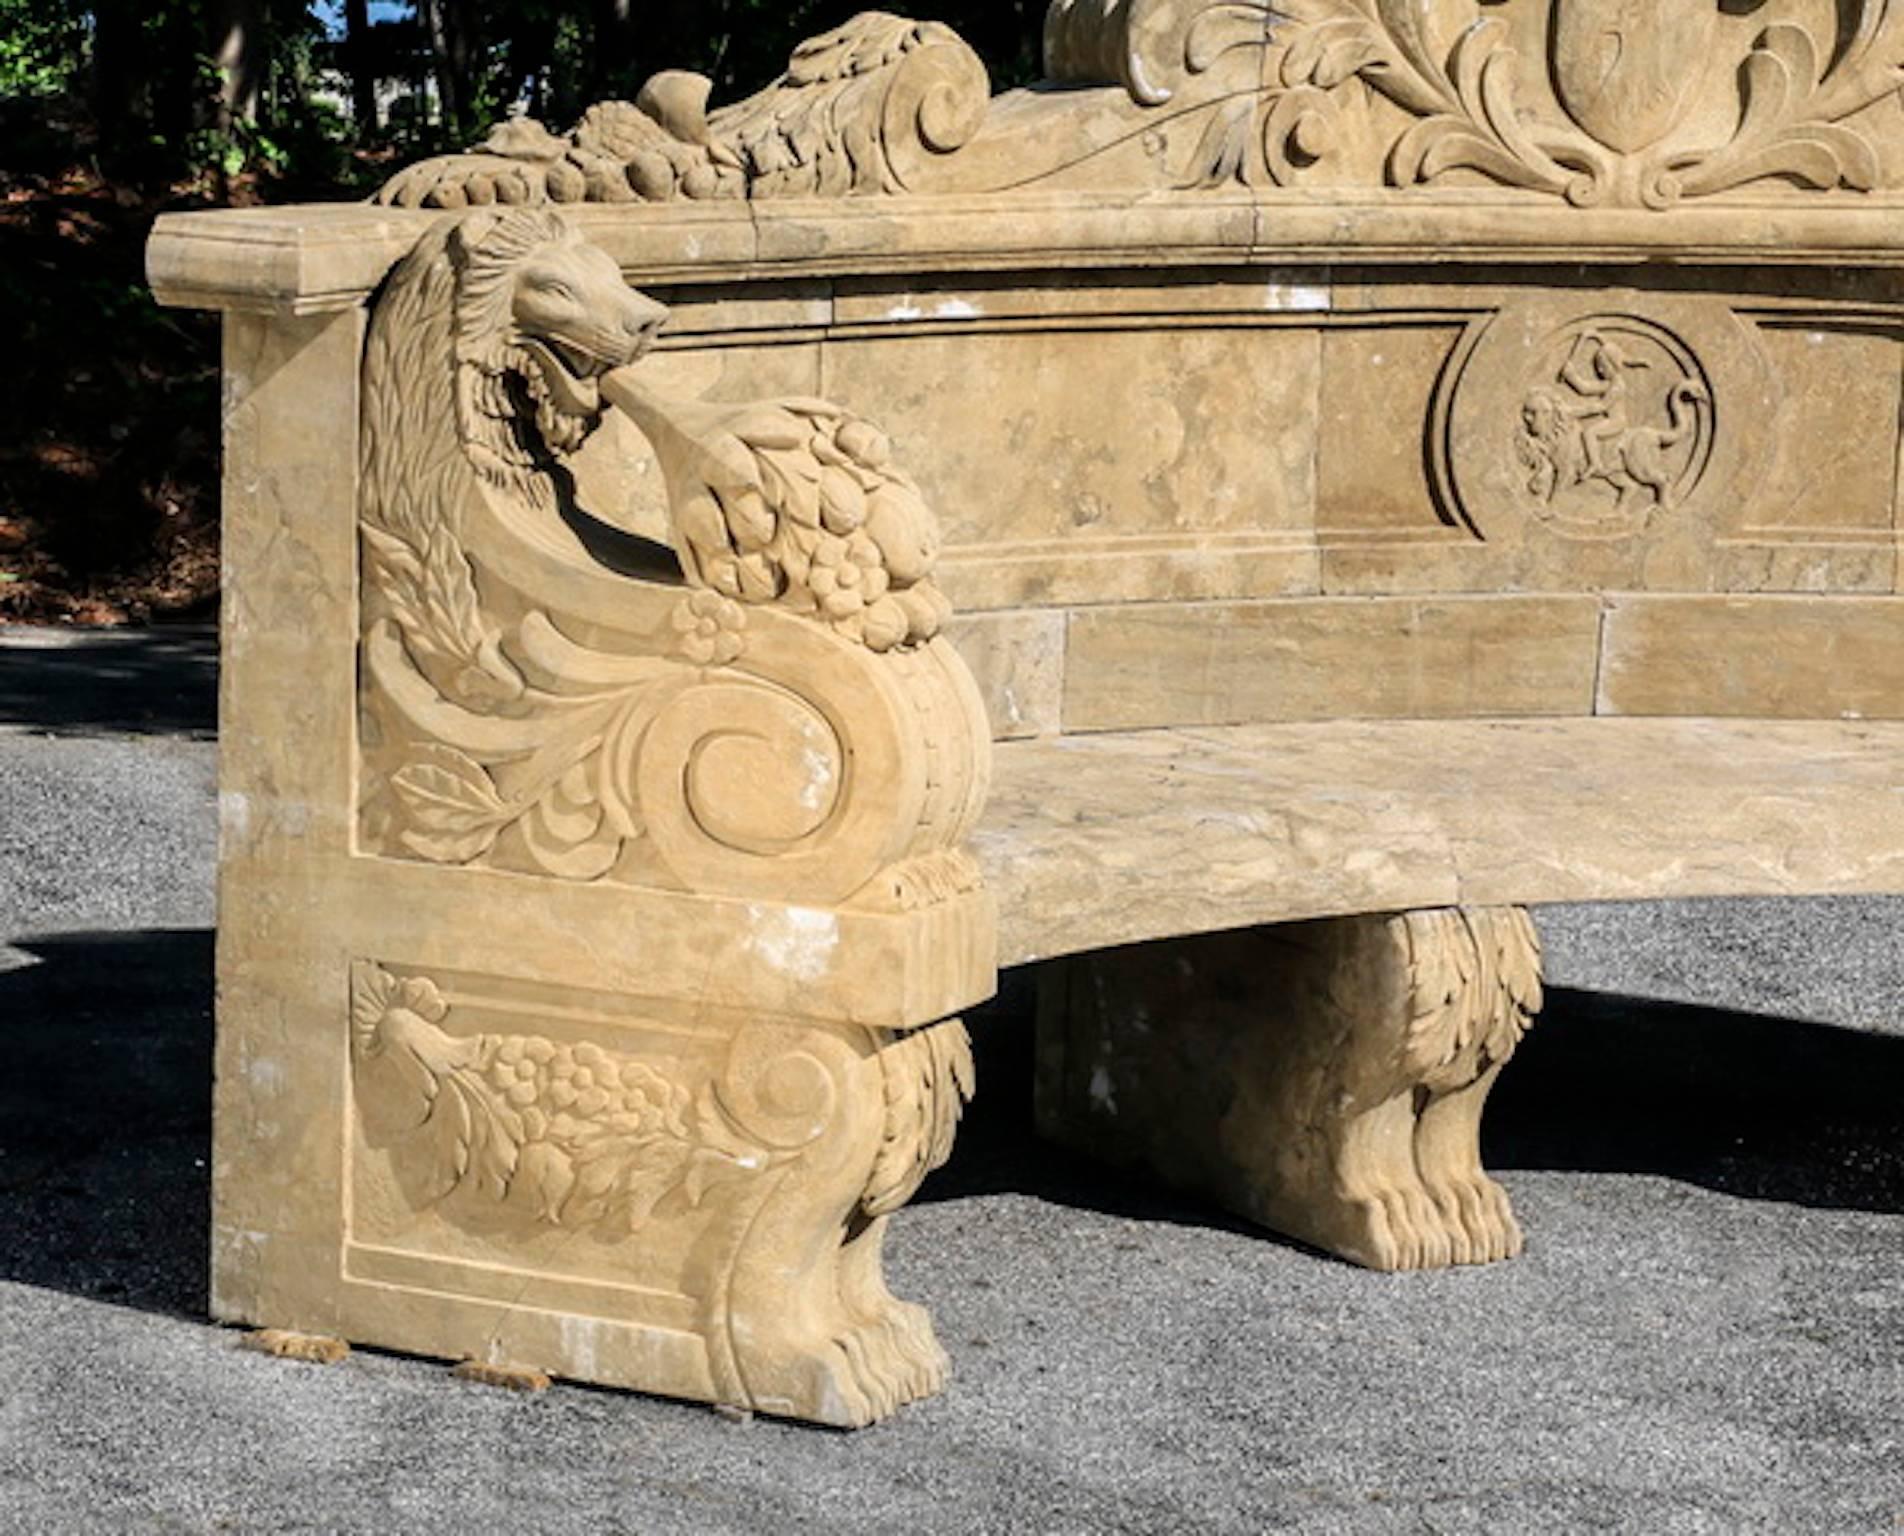 Carved marble garden bench in the Neoclassical taste, the demilune bench with carved backrest and elaborate winged lion armrests, surmounted by the carved pediment with a shield crest flanked by scroll work, the whole rising on four figural lion's